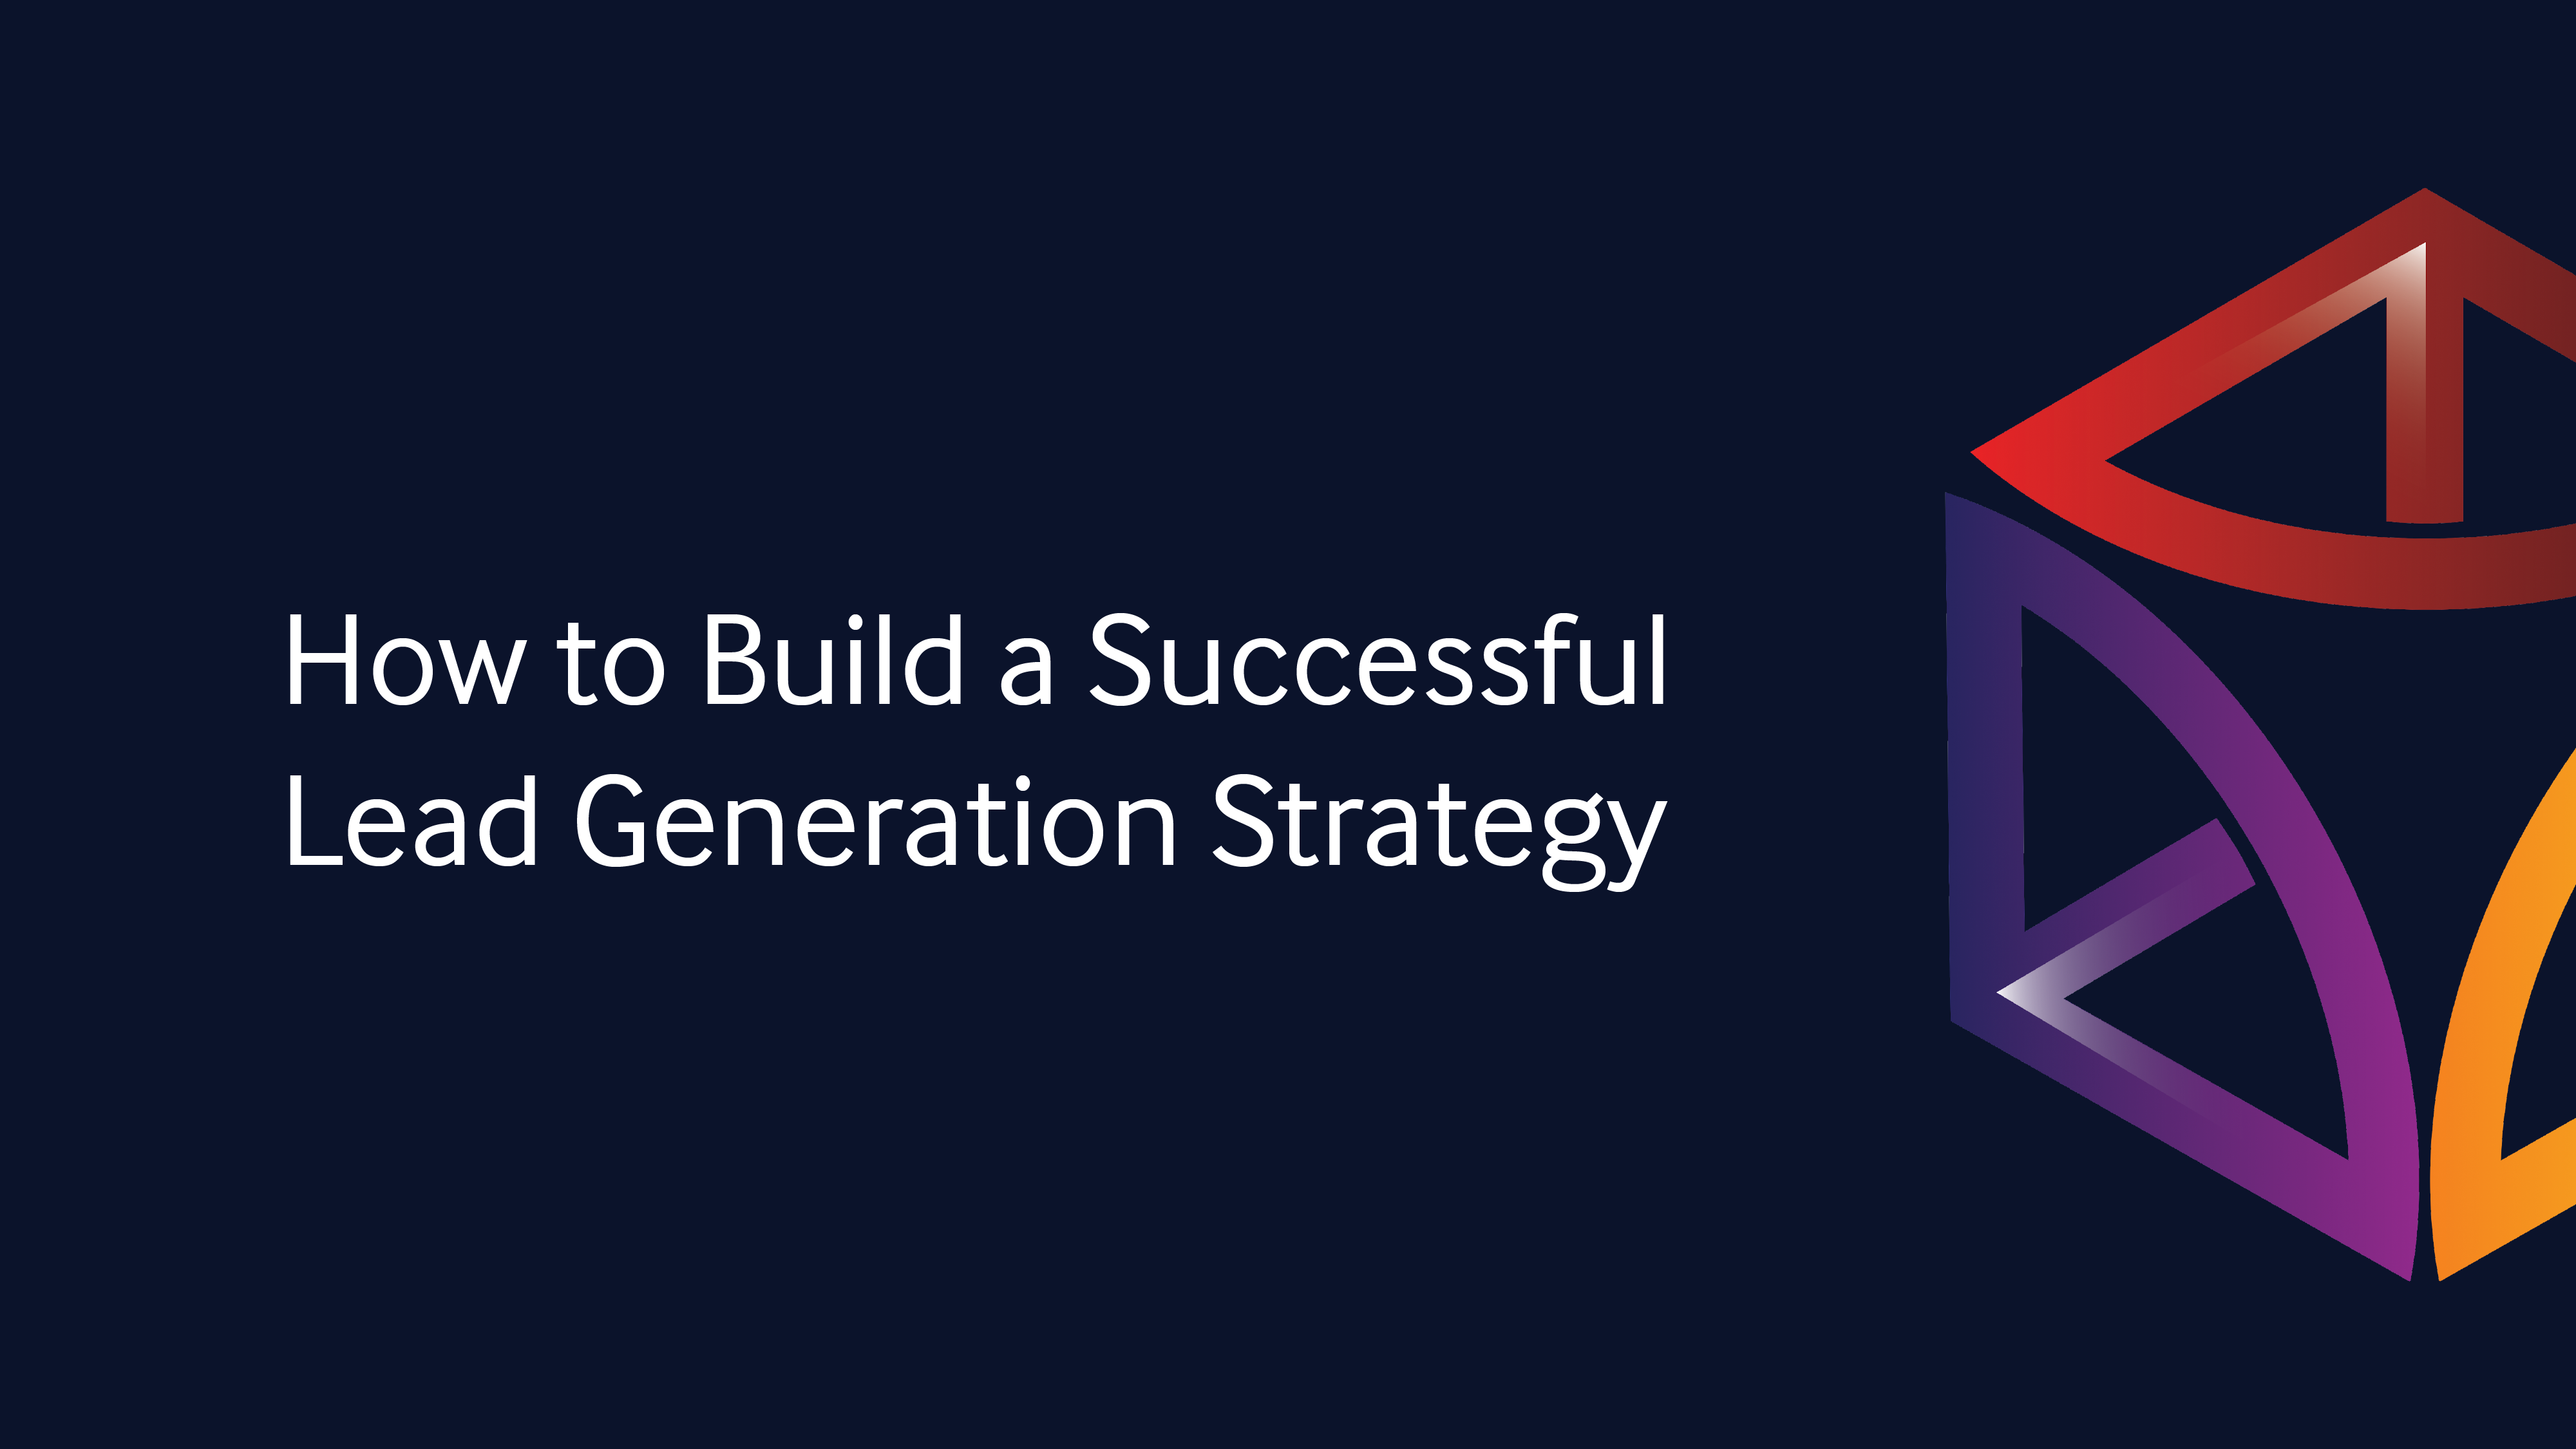 How to Build a Successful Lead Generation Strategy